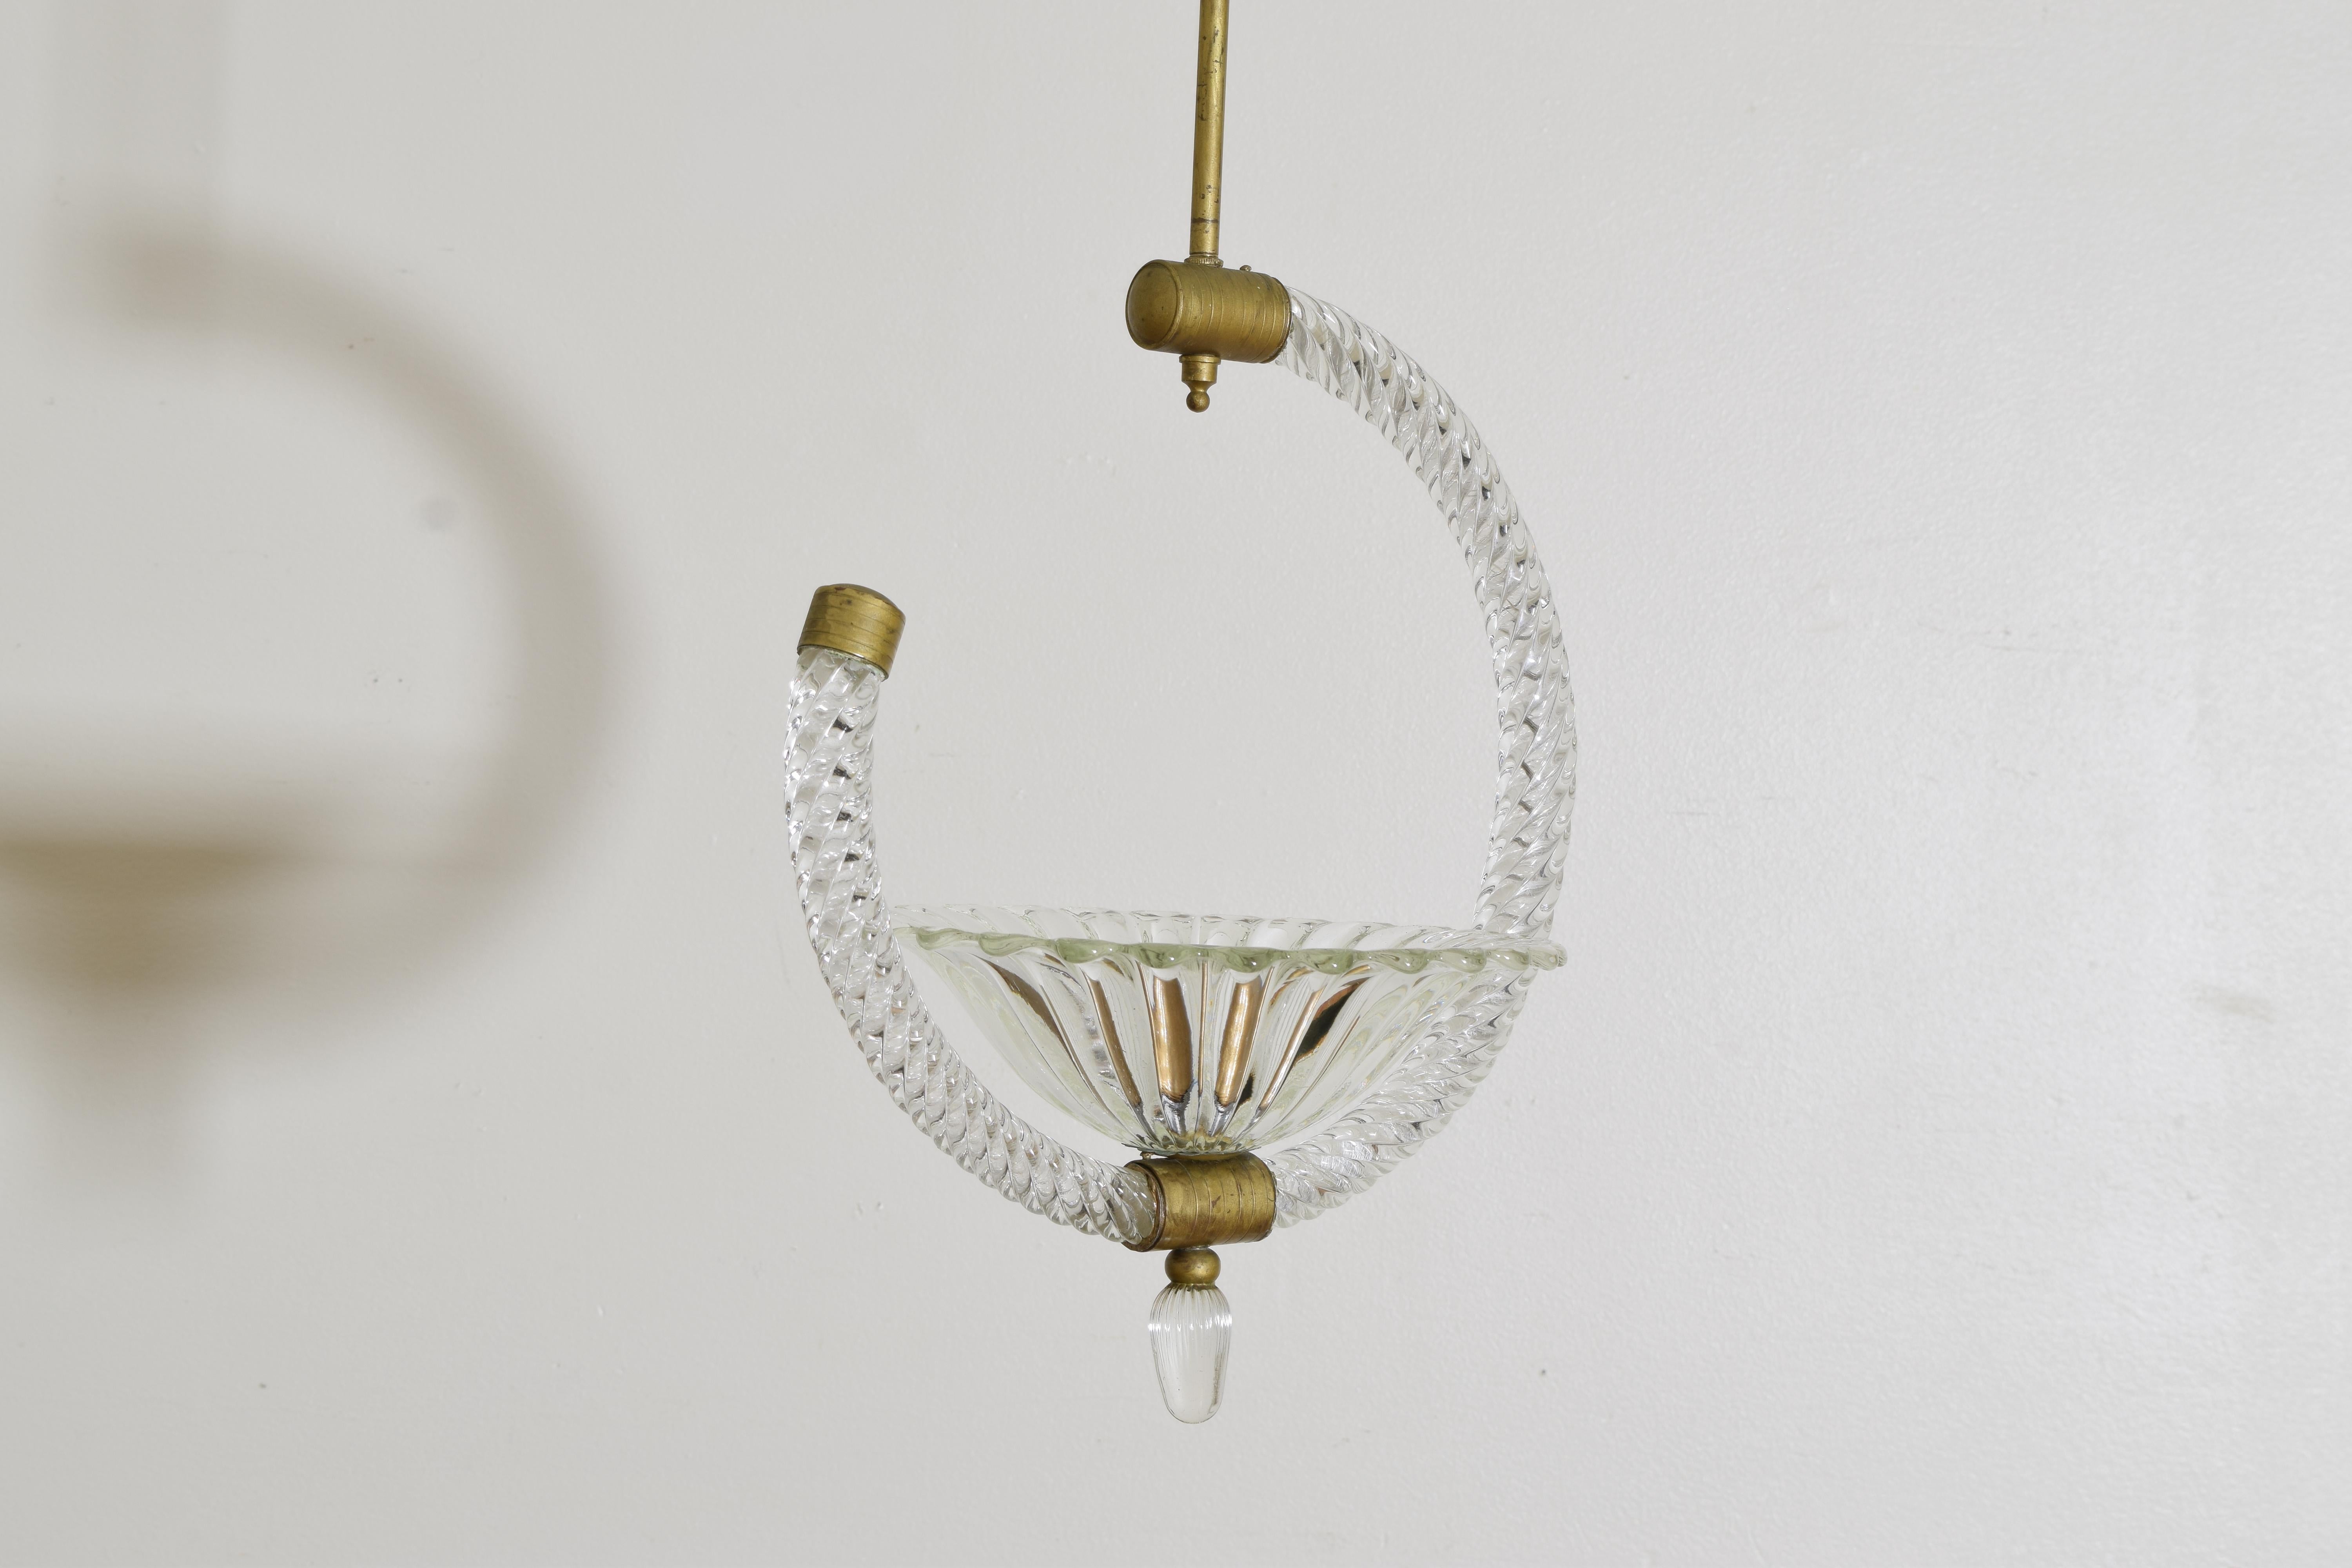 Hanging from a brass rod the curved and spiraled blown glass elements forming a C shape and joined by brass connectors, having one large shaped glass bobeche containing a single socket with a glass terminal, UL wired